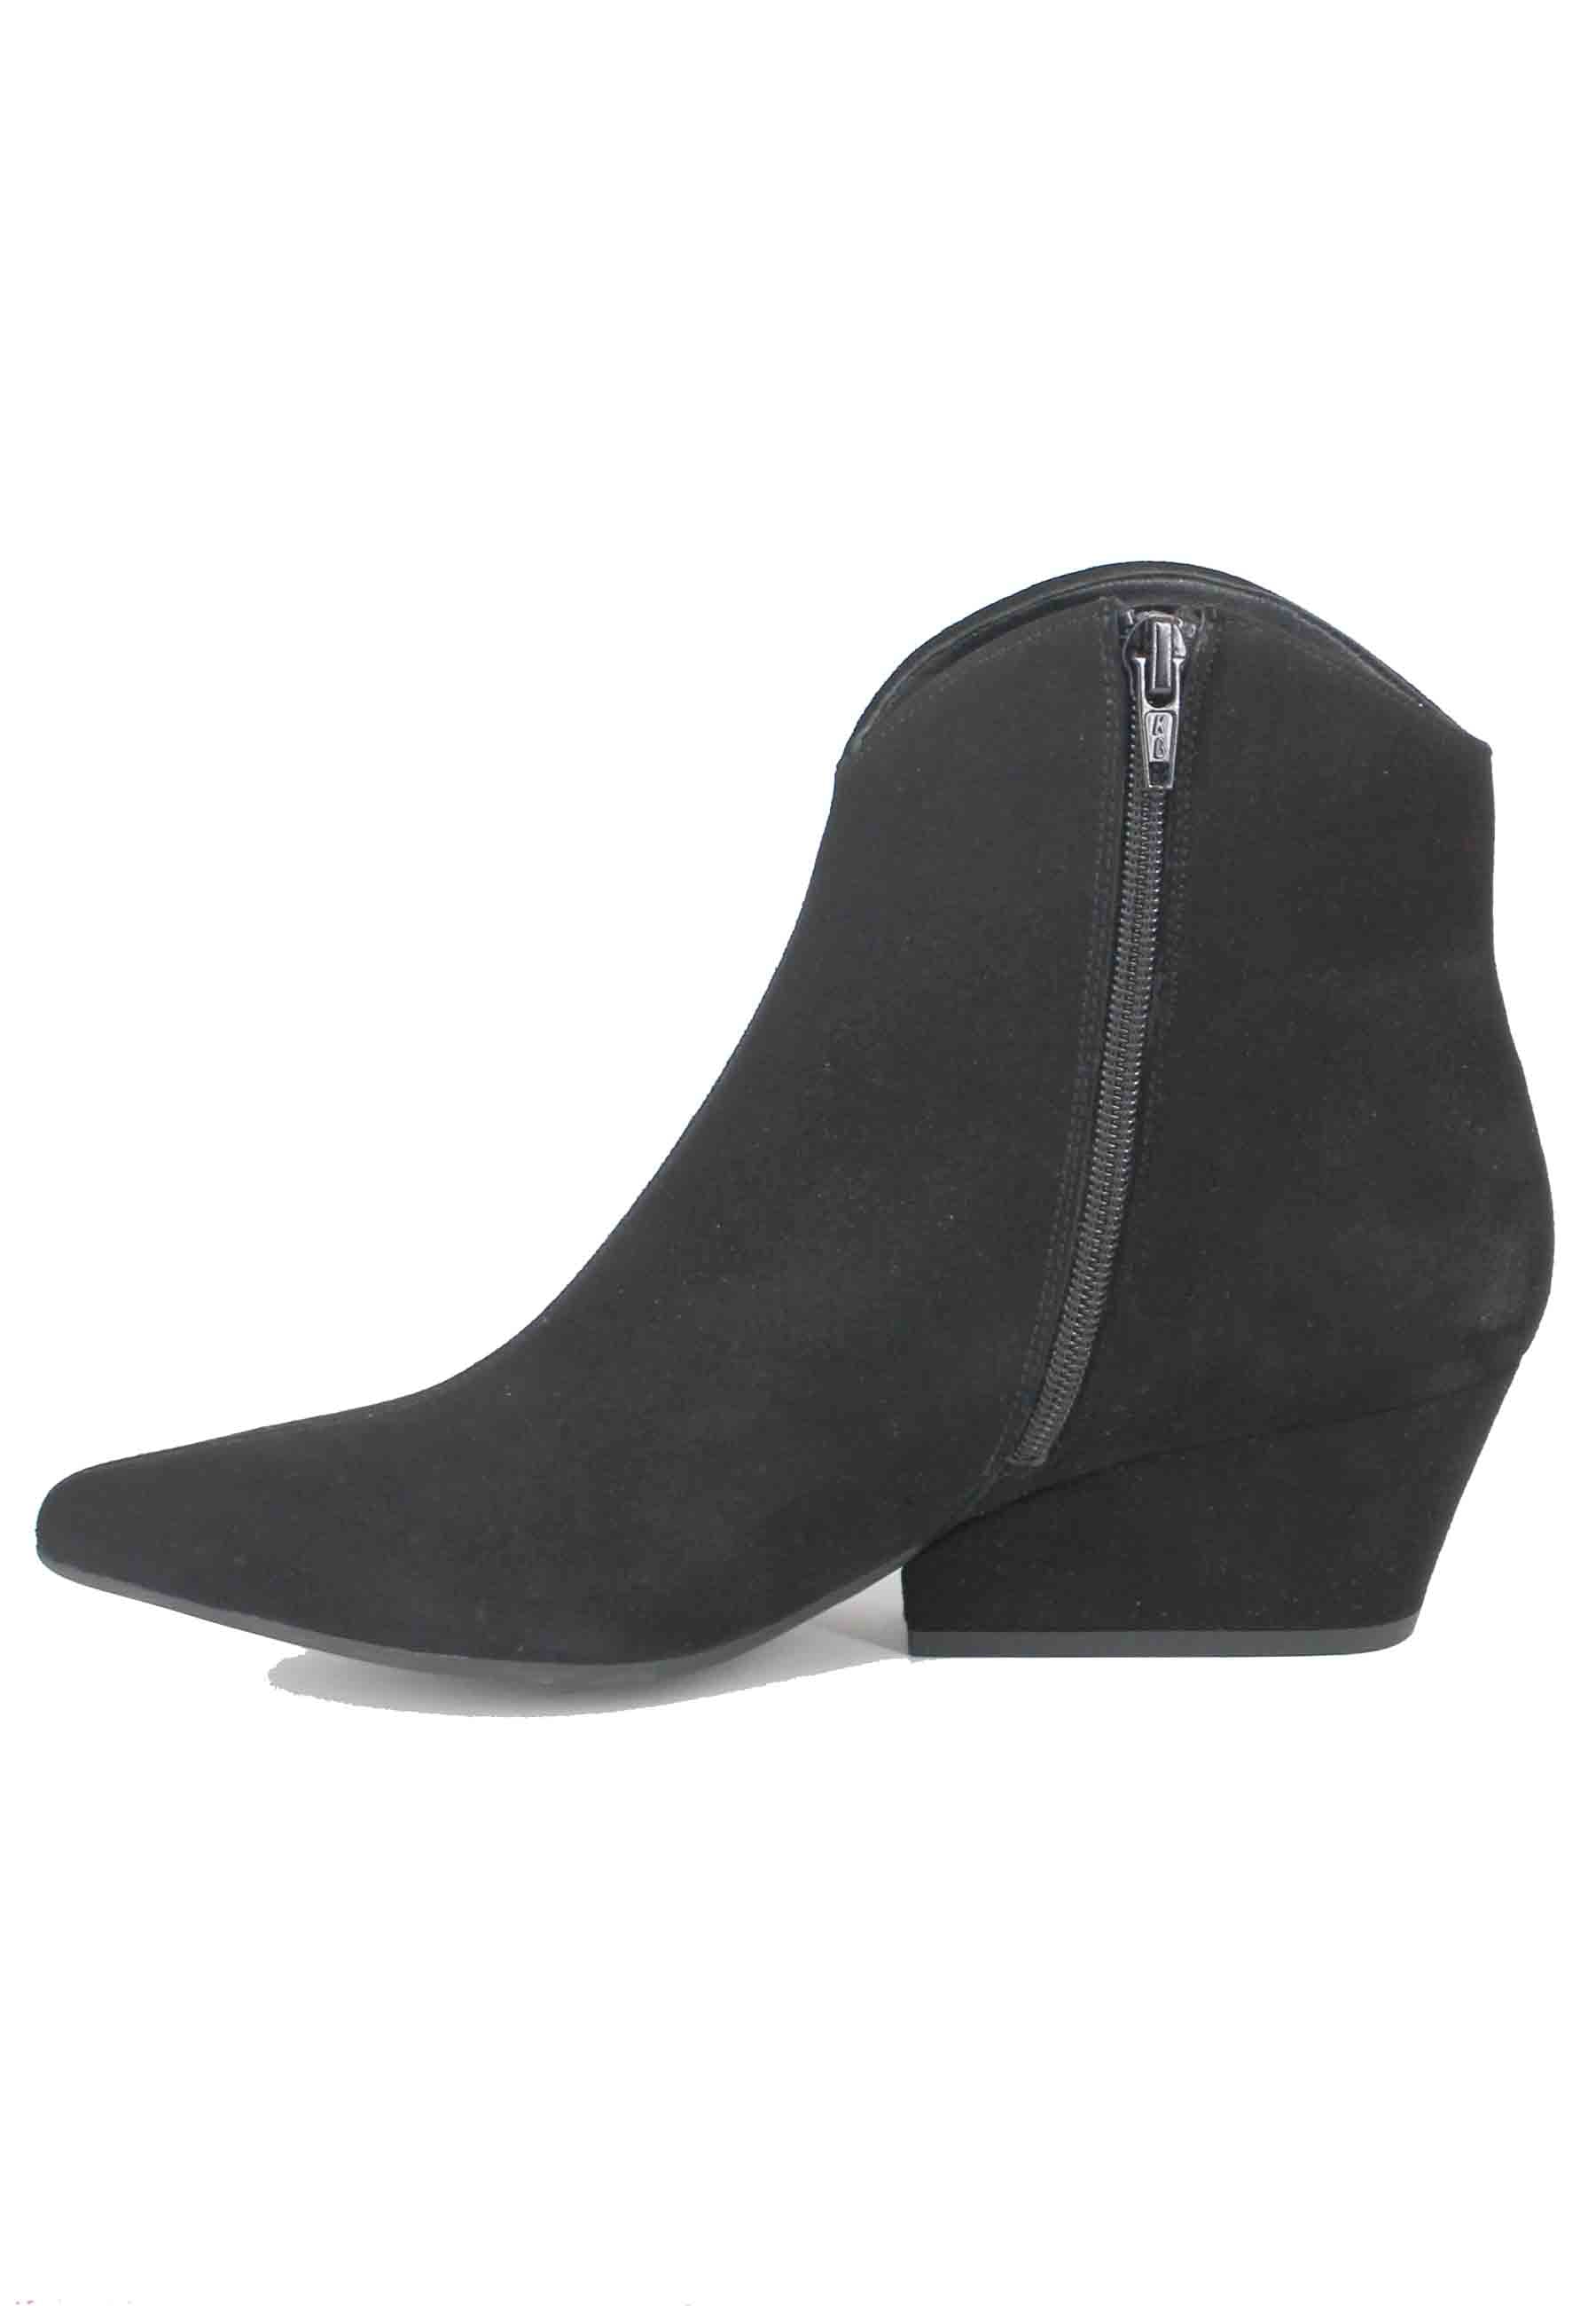 Taxani women's ankle boots in black suede